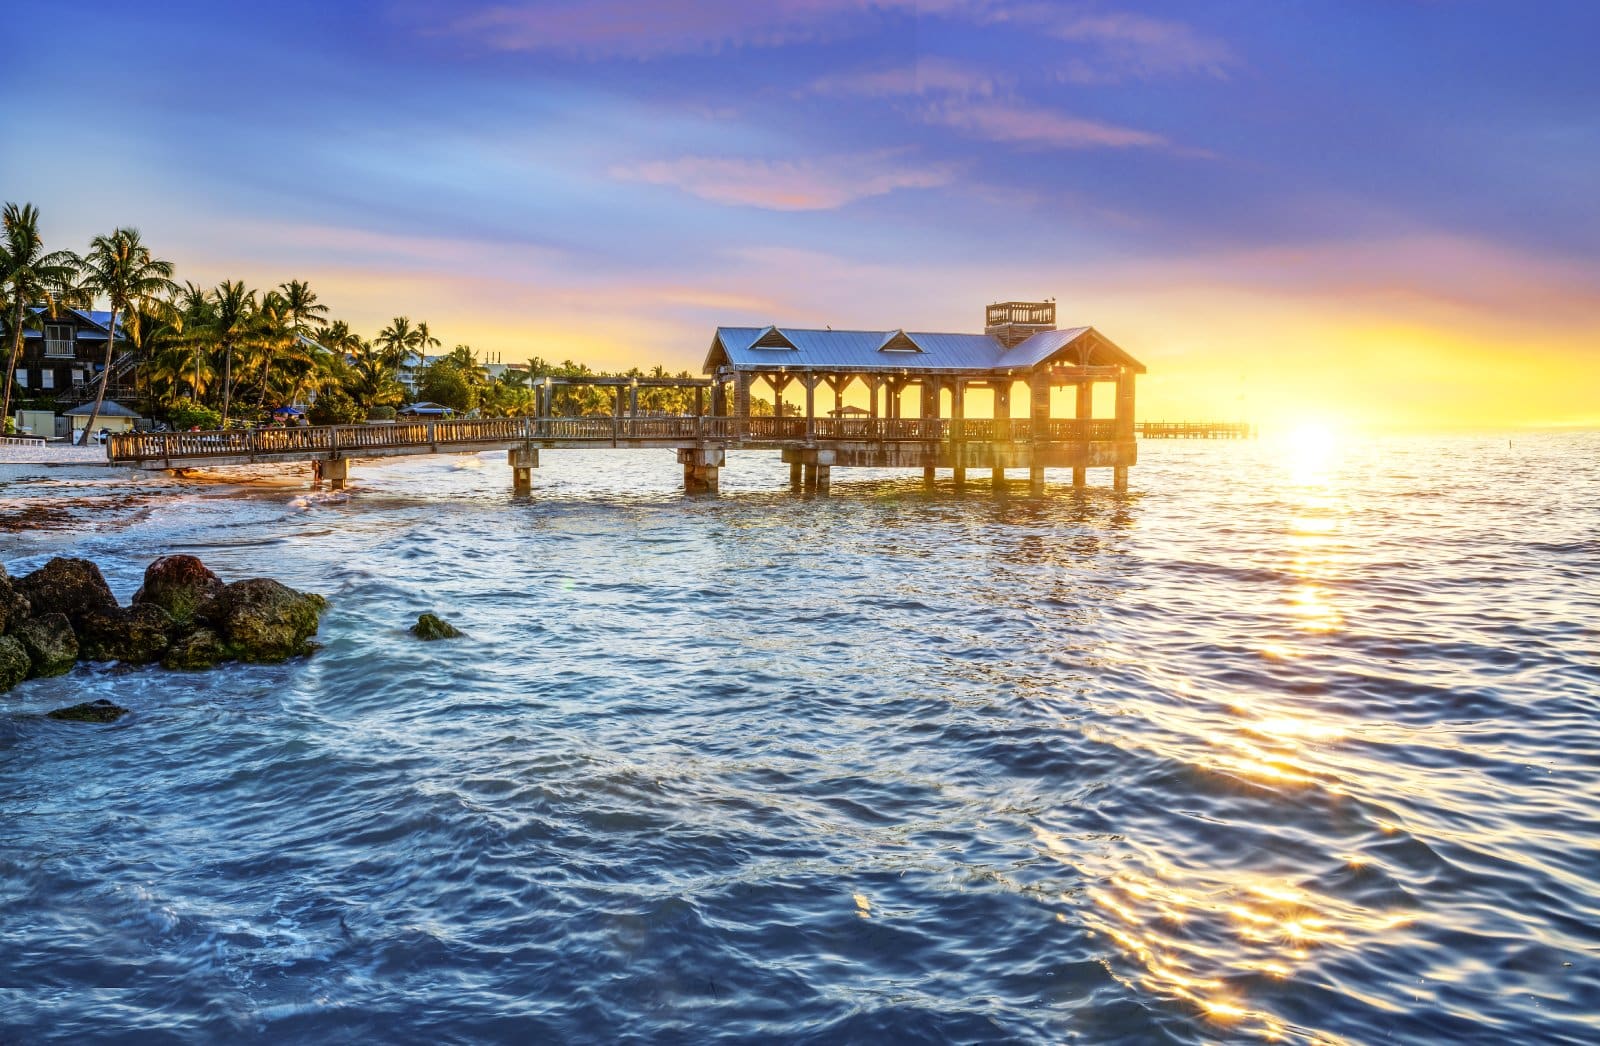 <p><span>Experience the laid-back Caribbean vibes of Key West with its colorful architecture, palm-lined streets, and vibrant nightlife, all without the need for international travel insurance.</span></p>